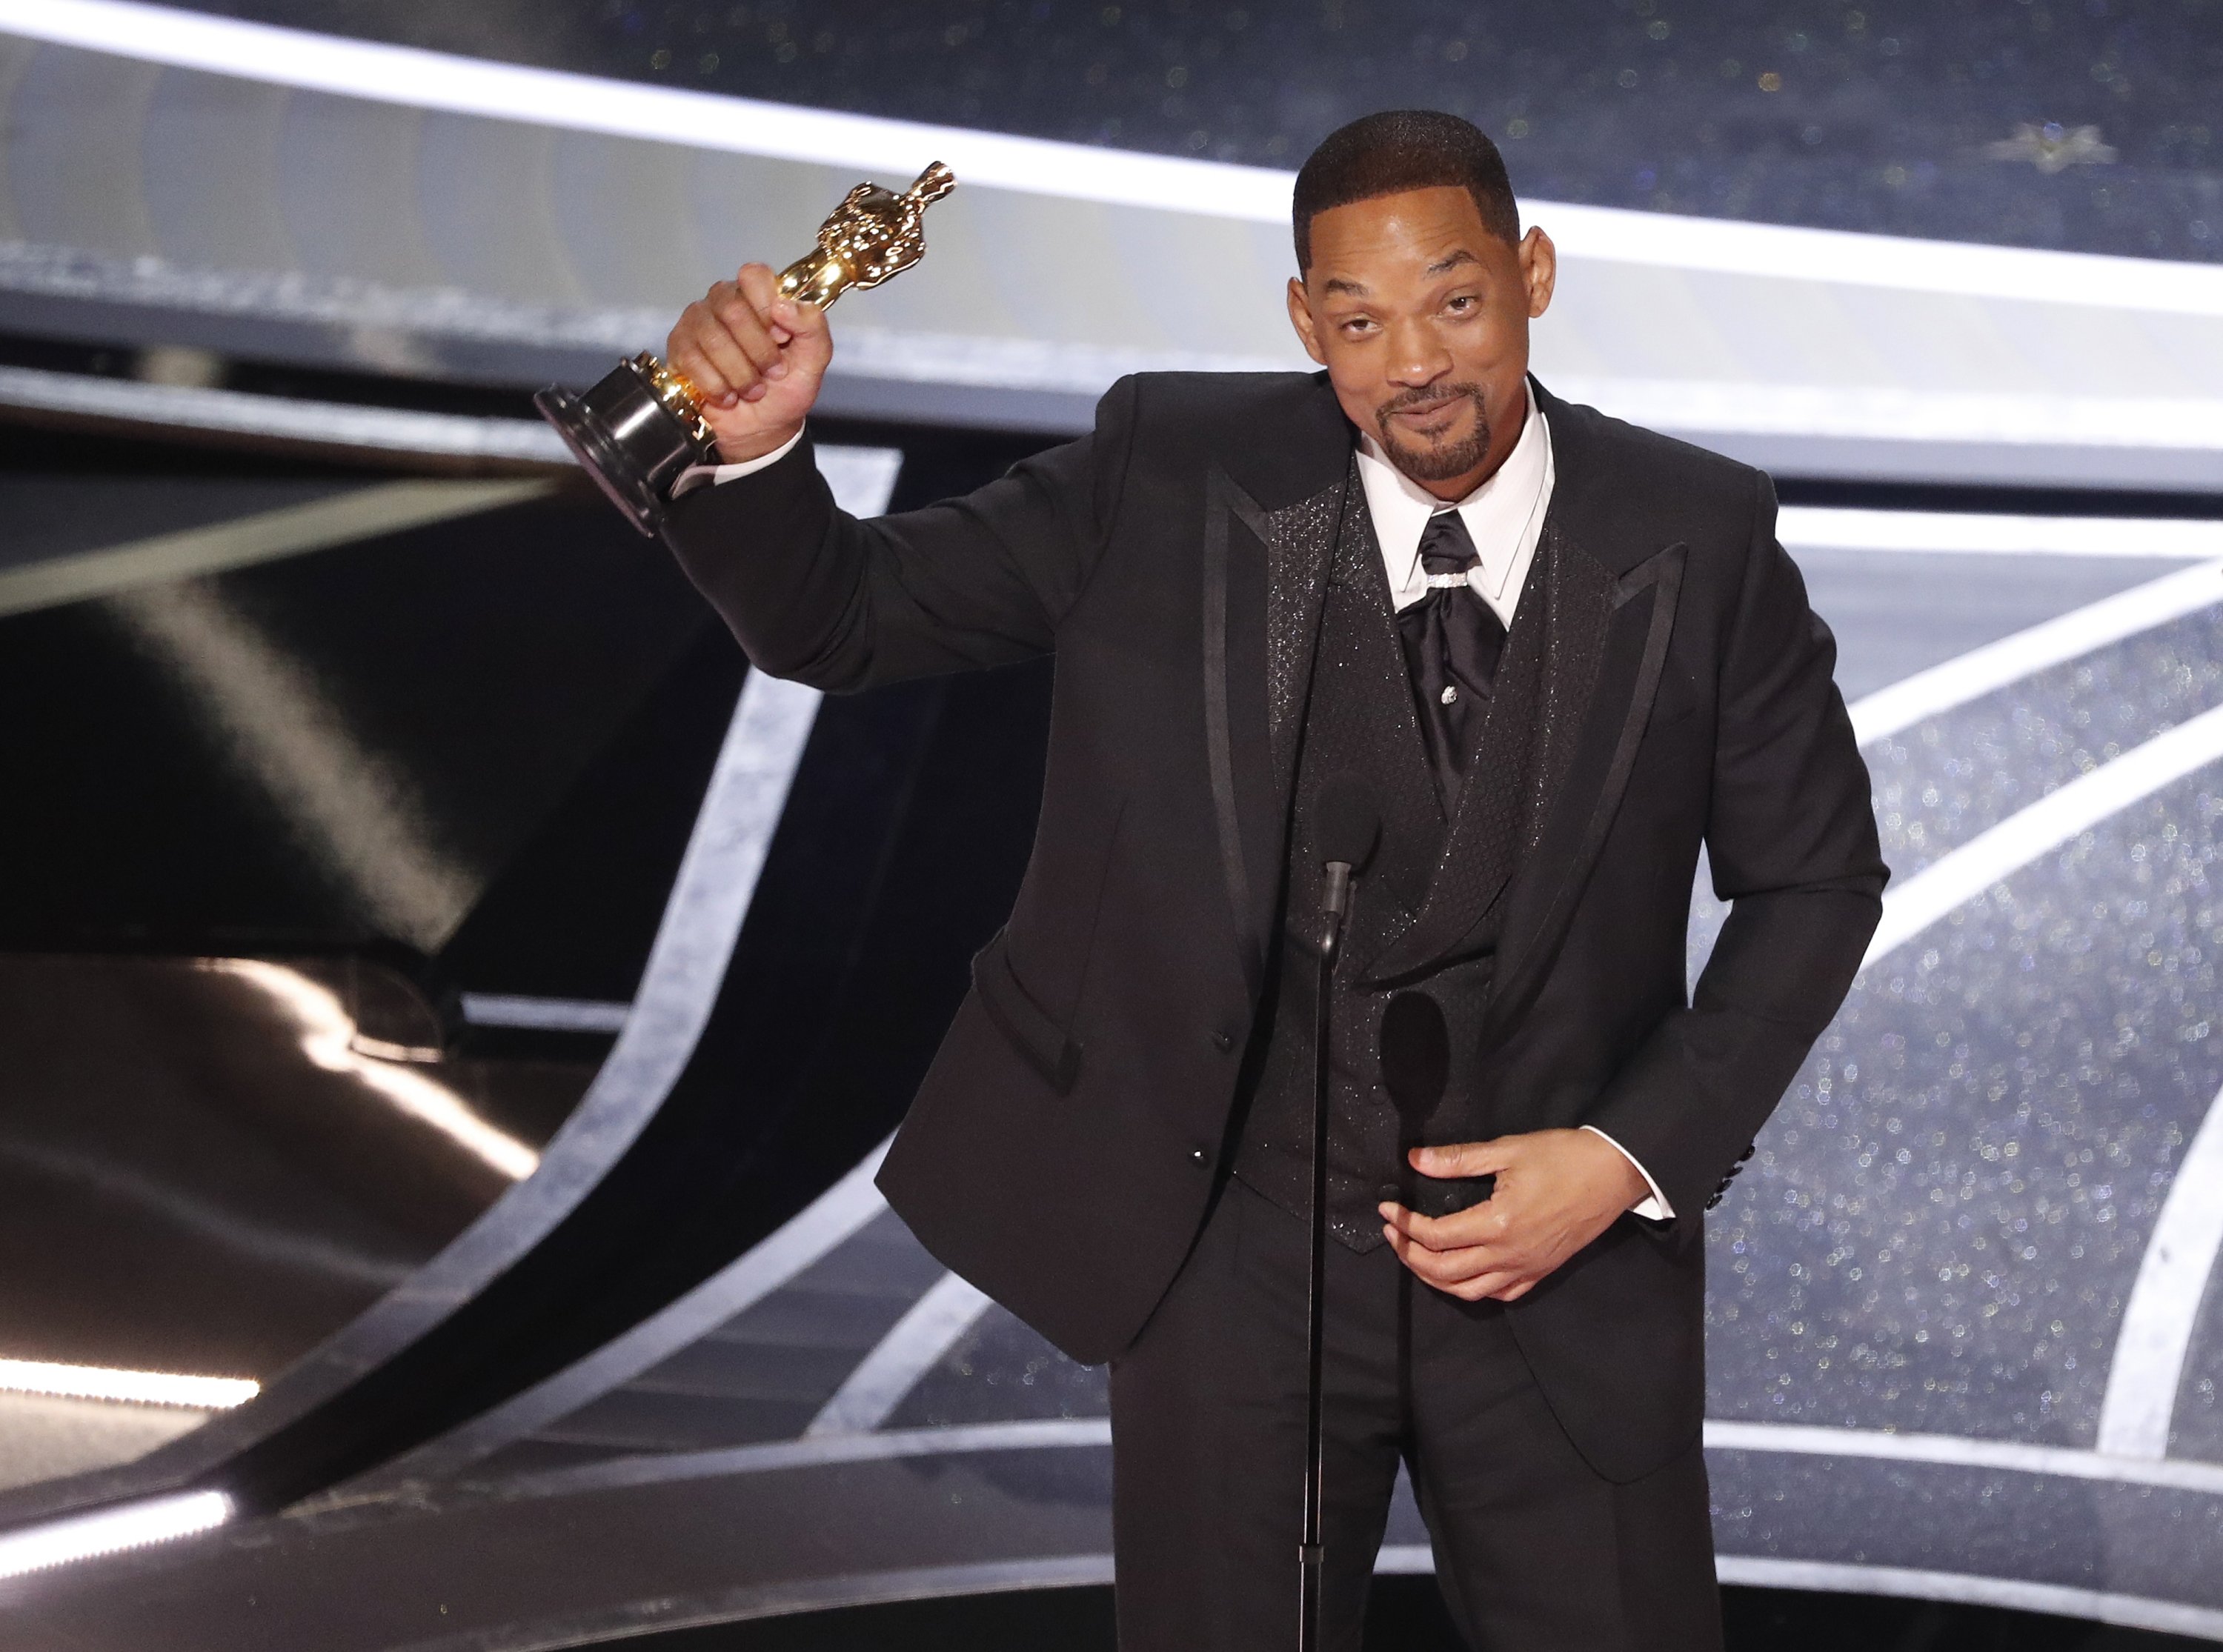 Us actor Will Smith reacts after winning the Oscar for Best Actor for 'King Richard' during the 94th annual Academy Awards ceremony at the Dolby Theatre in Hollywood, Los Angeles, California, USA, 27 March 2022. (EPA)